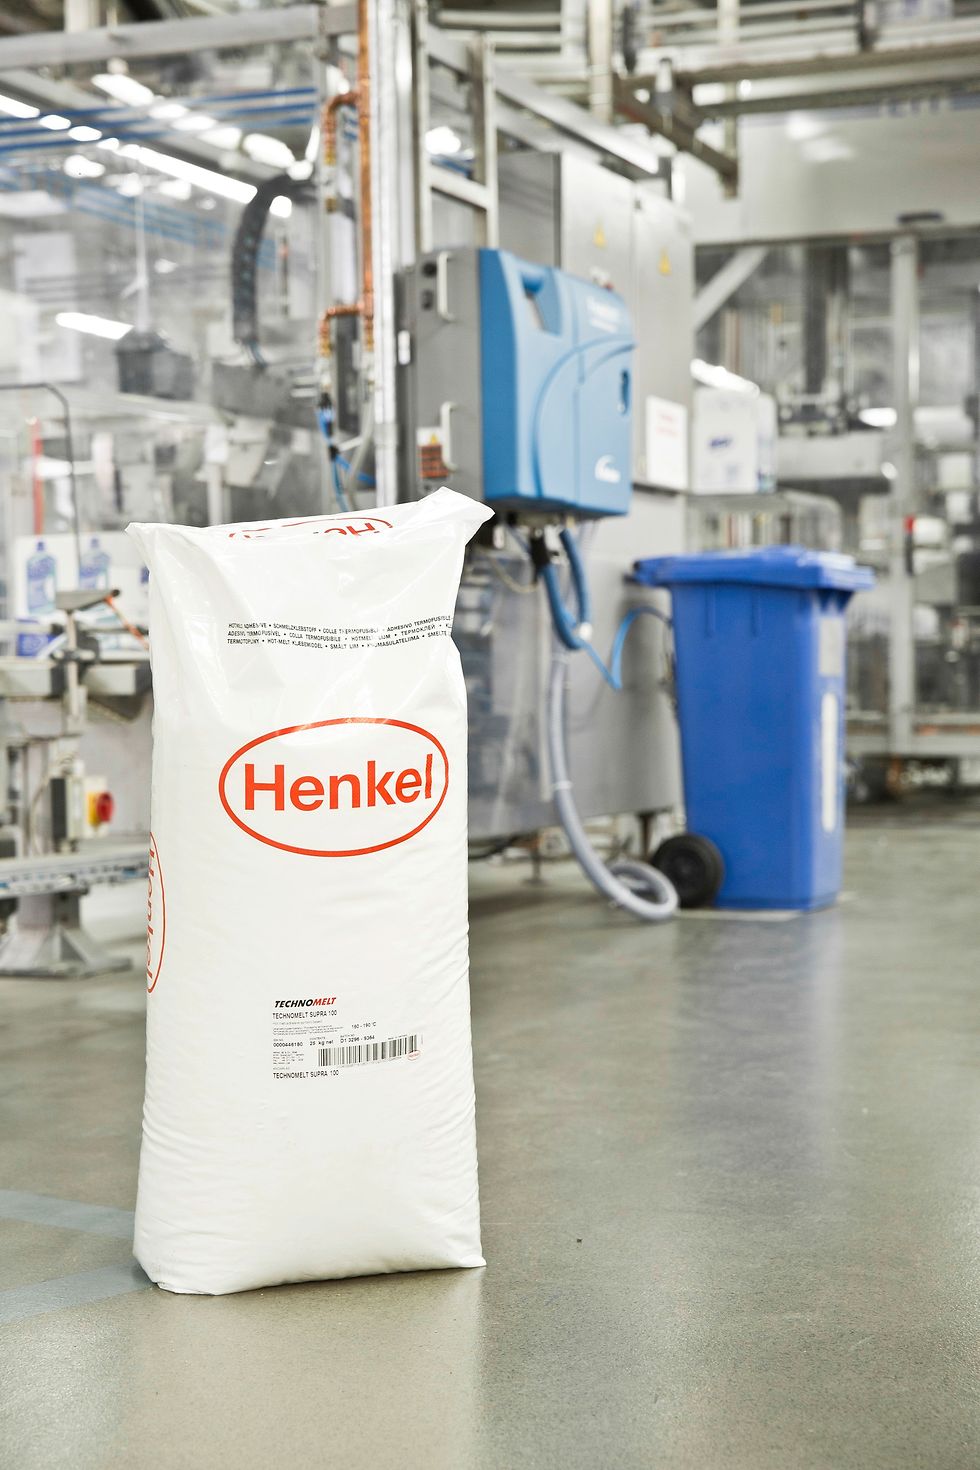 Adhesive application system Freedom from Nordson and Henkel 